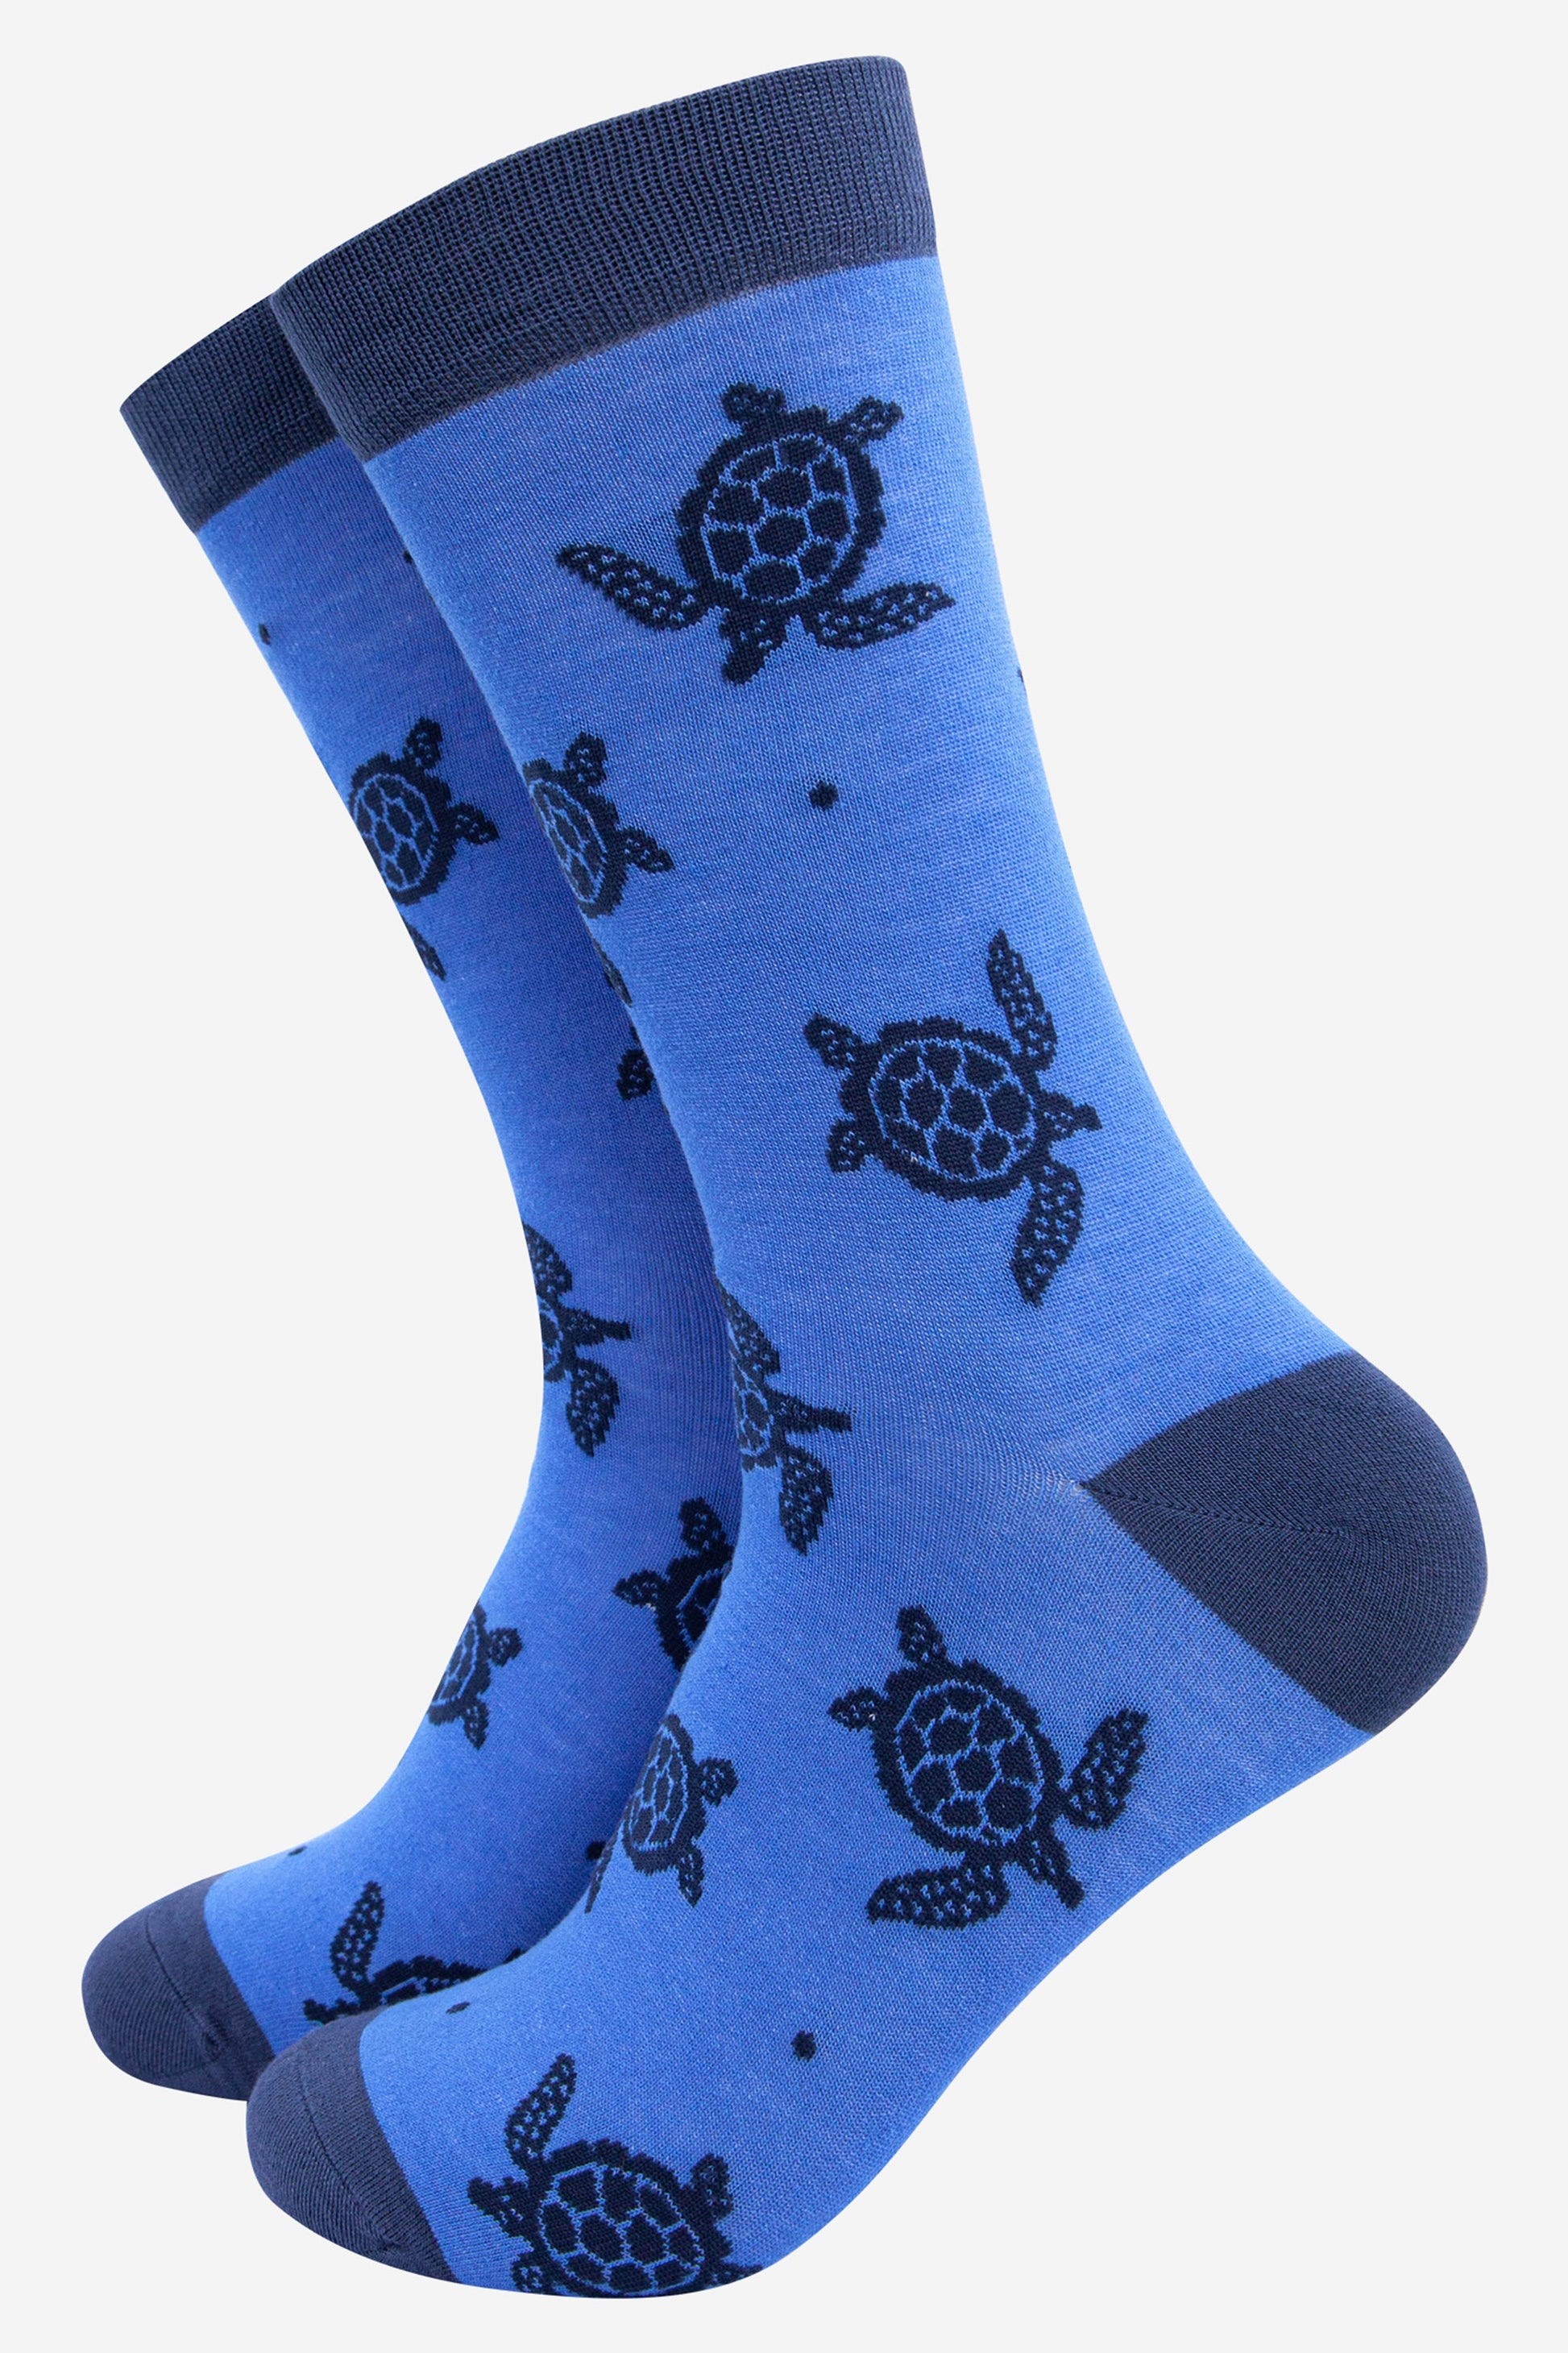 light blue bamboo socks with an all over print of a swimming sea turtle in navy blue